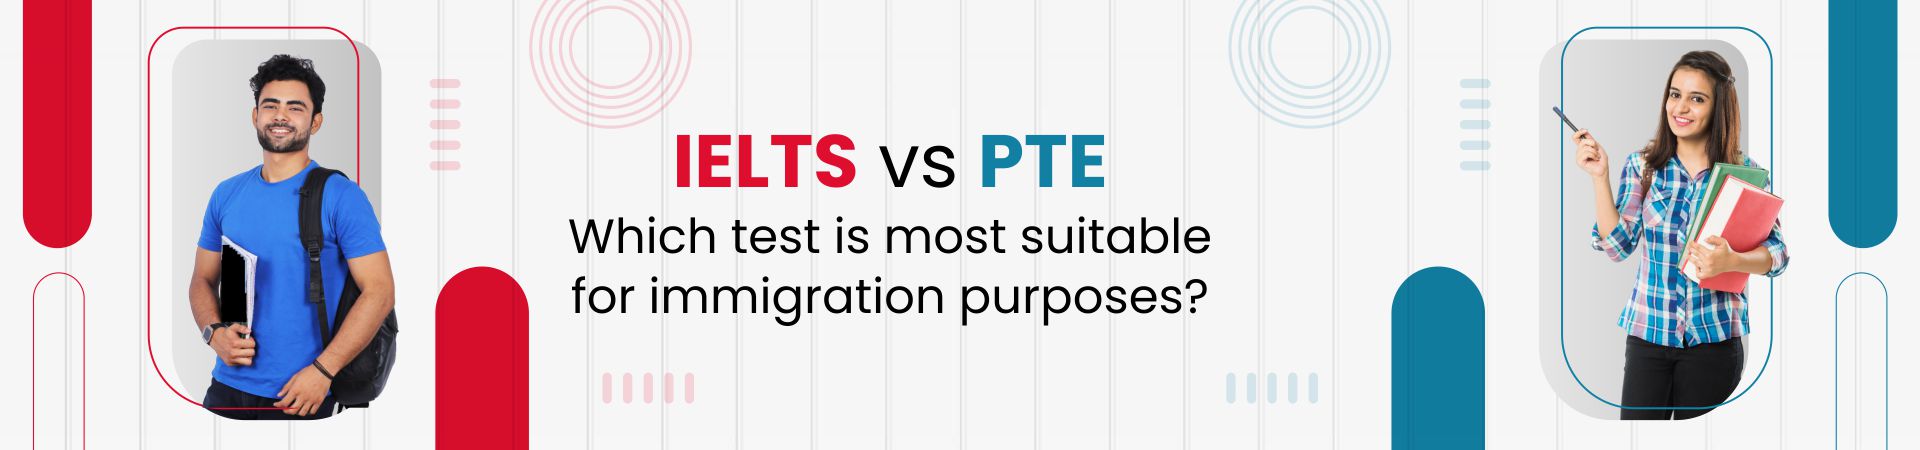 IELTS vs PTE: Which test is most suitable for immigration purposes?